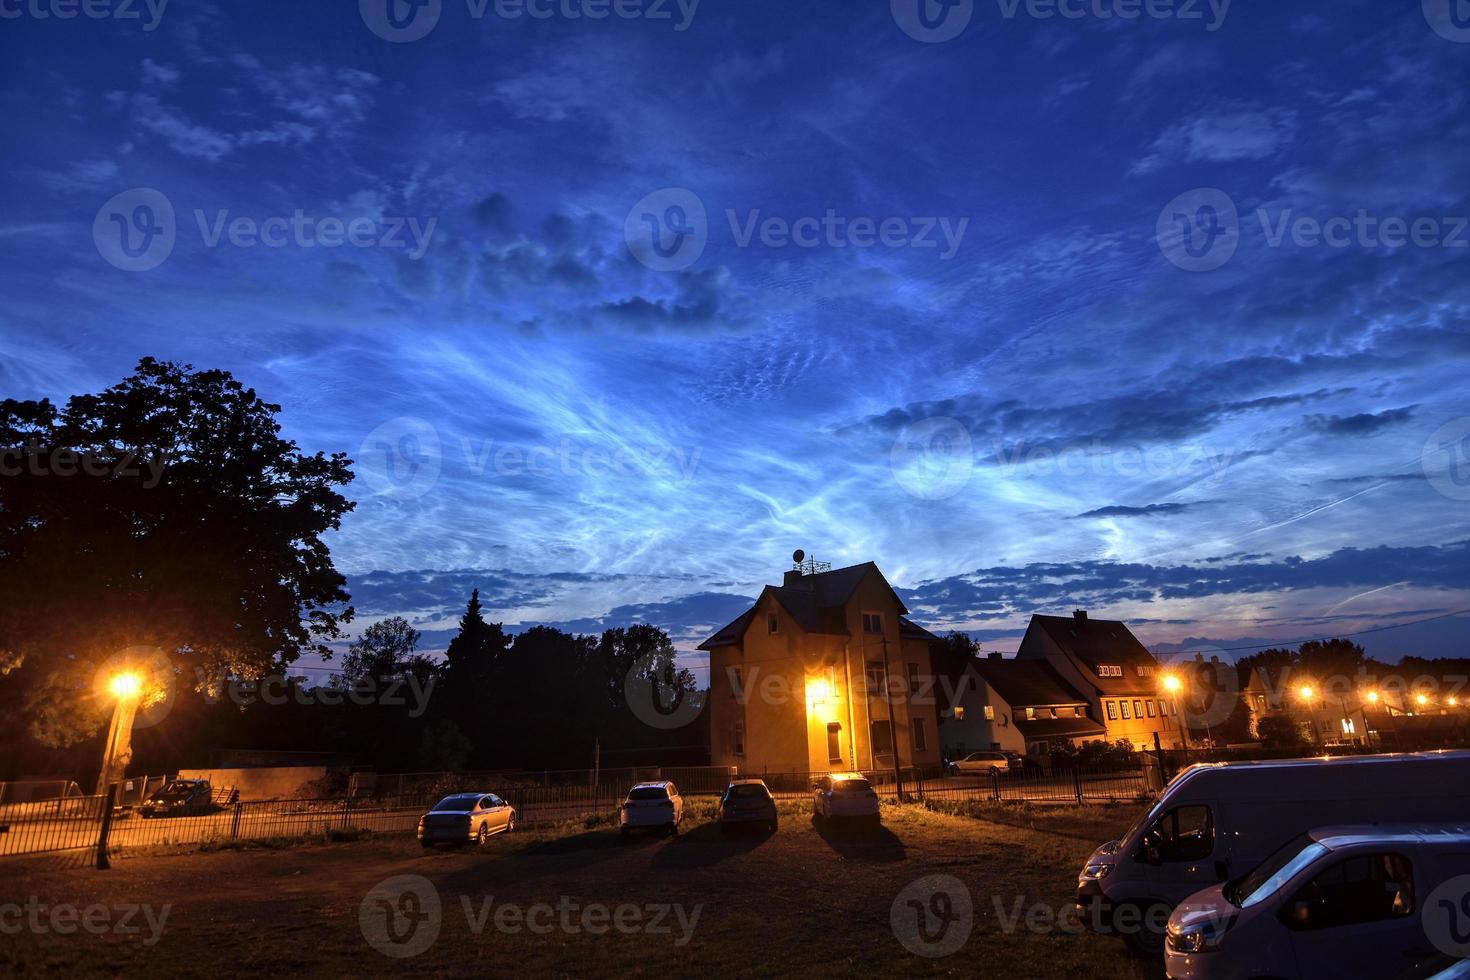 extremly bright and rare noctilucent clouds in the city on 21st June 2019 in a summer night in Germany photo